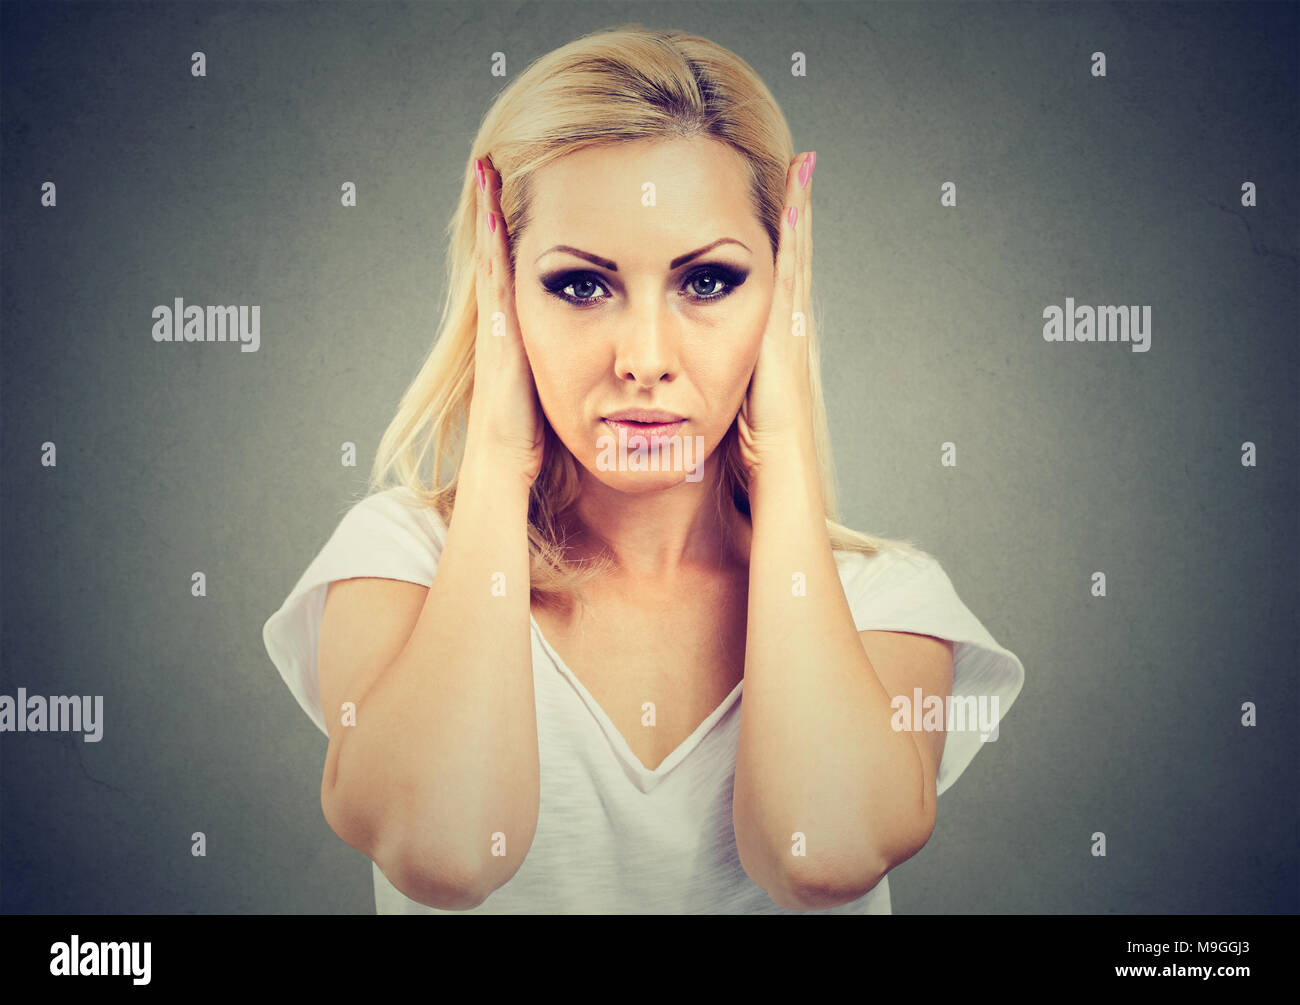 Young serious woman covering ears from rumors and noise avoiding problems and looking annoyed. Stock Photo